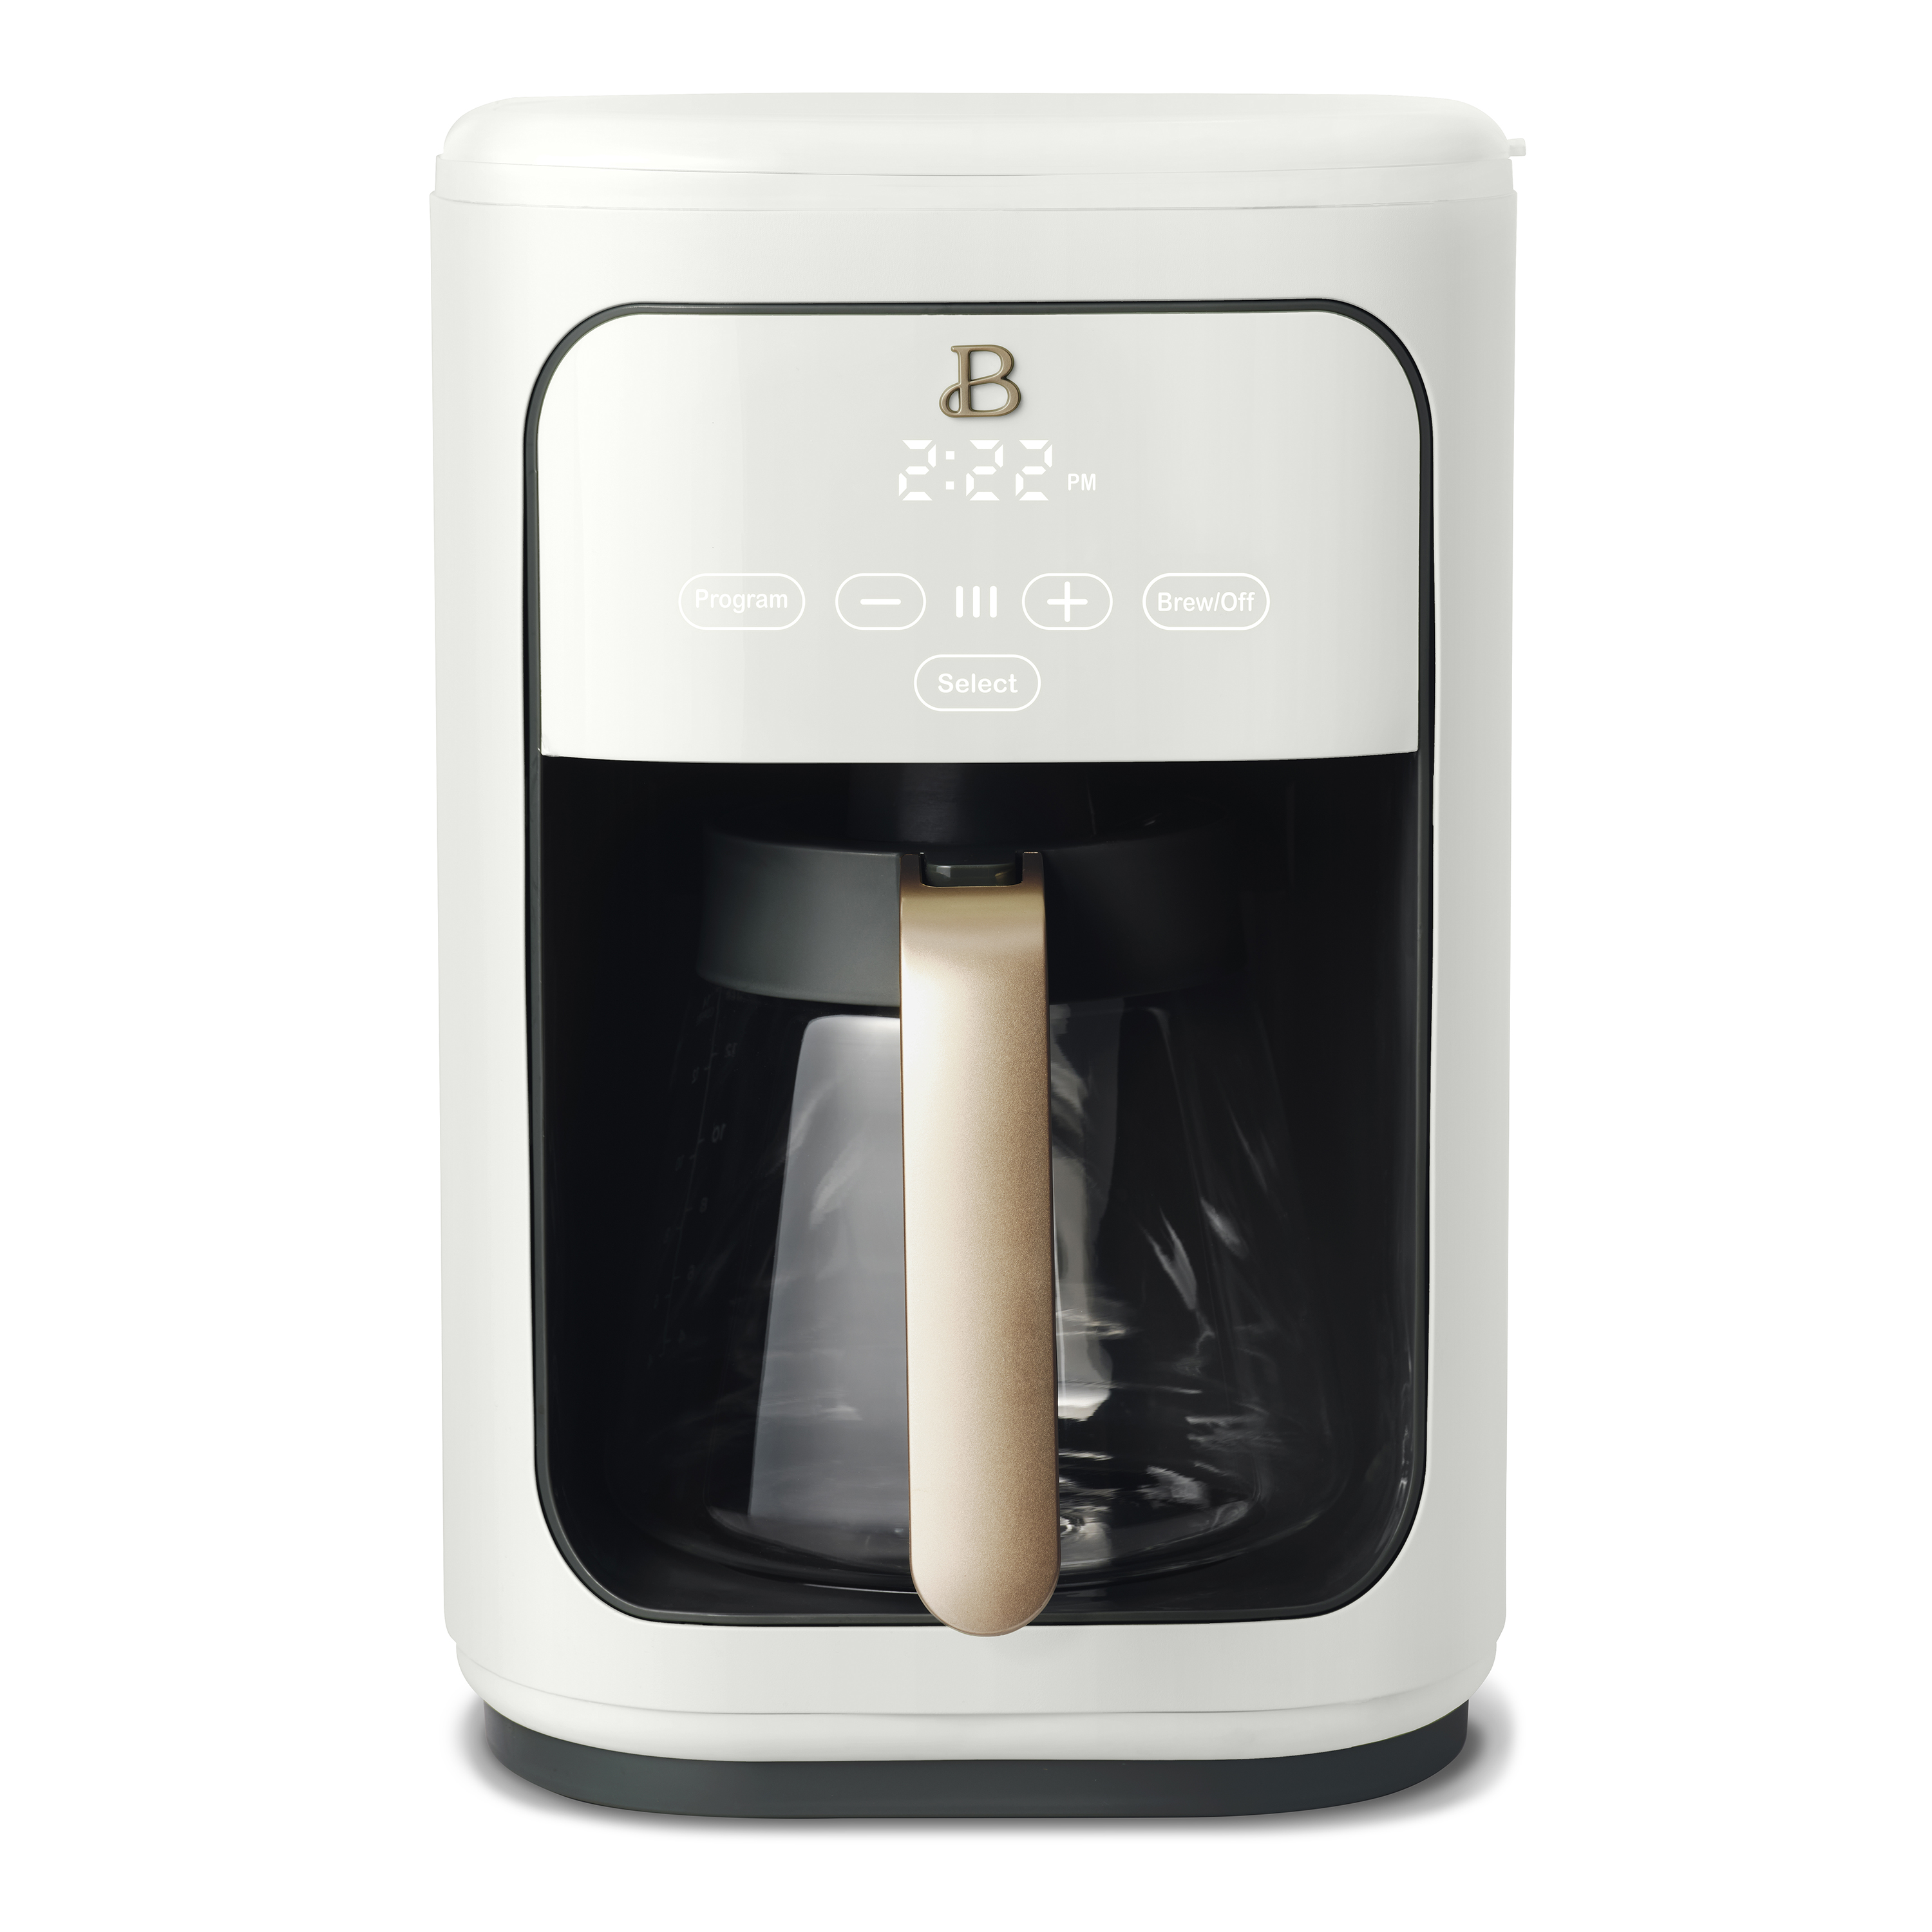 Beautiful 14-Cup Programmable Drip Coffee Maker with Touch-Activated Display, White Icing by Drew Barrymore - image 1 of 6